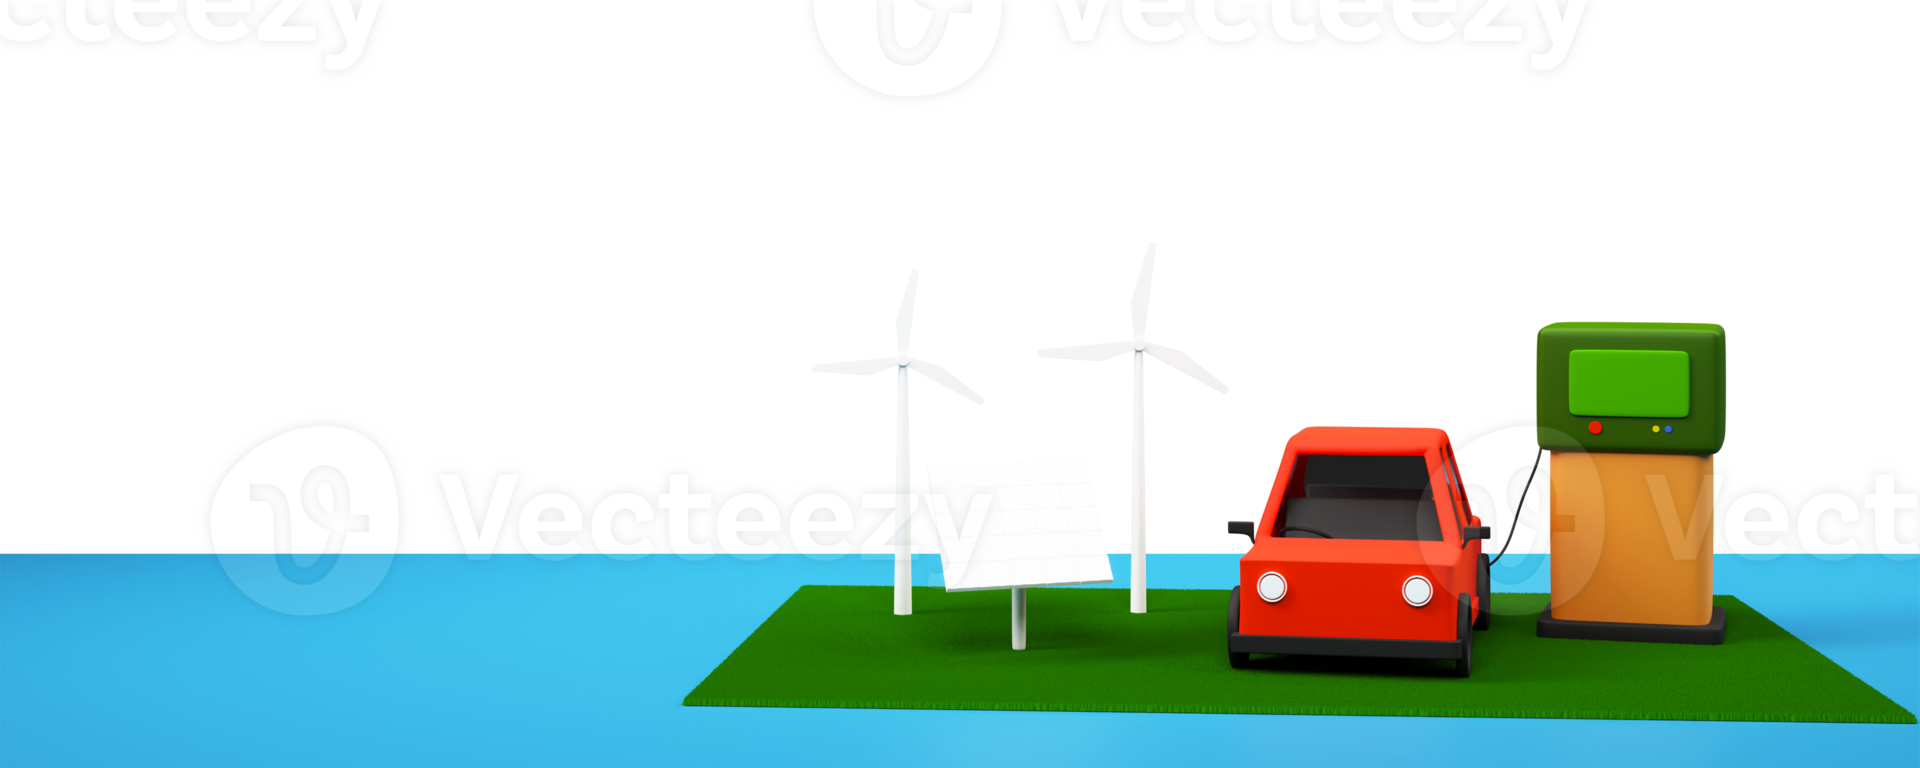 3D Electric Vehicle Charging In Station With Windmills And Solar Panel Against Background. png